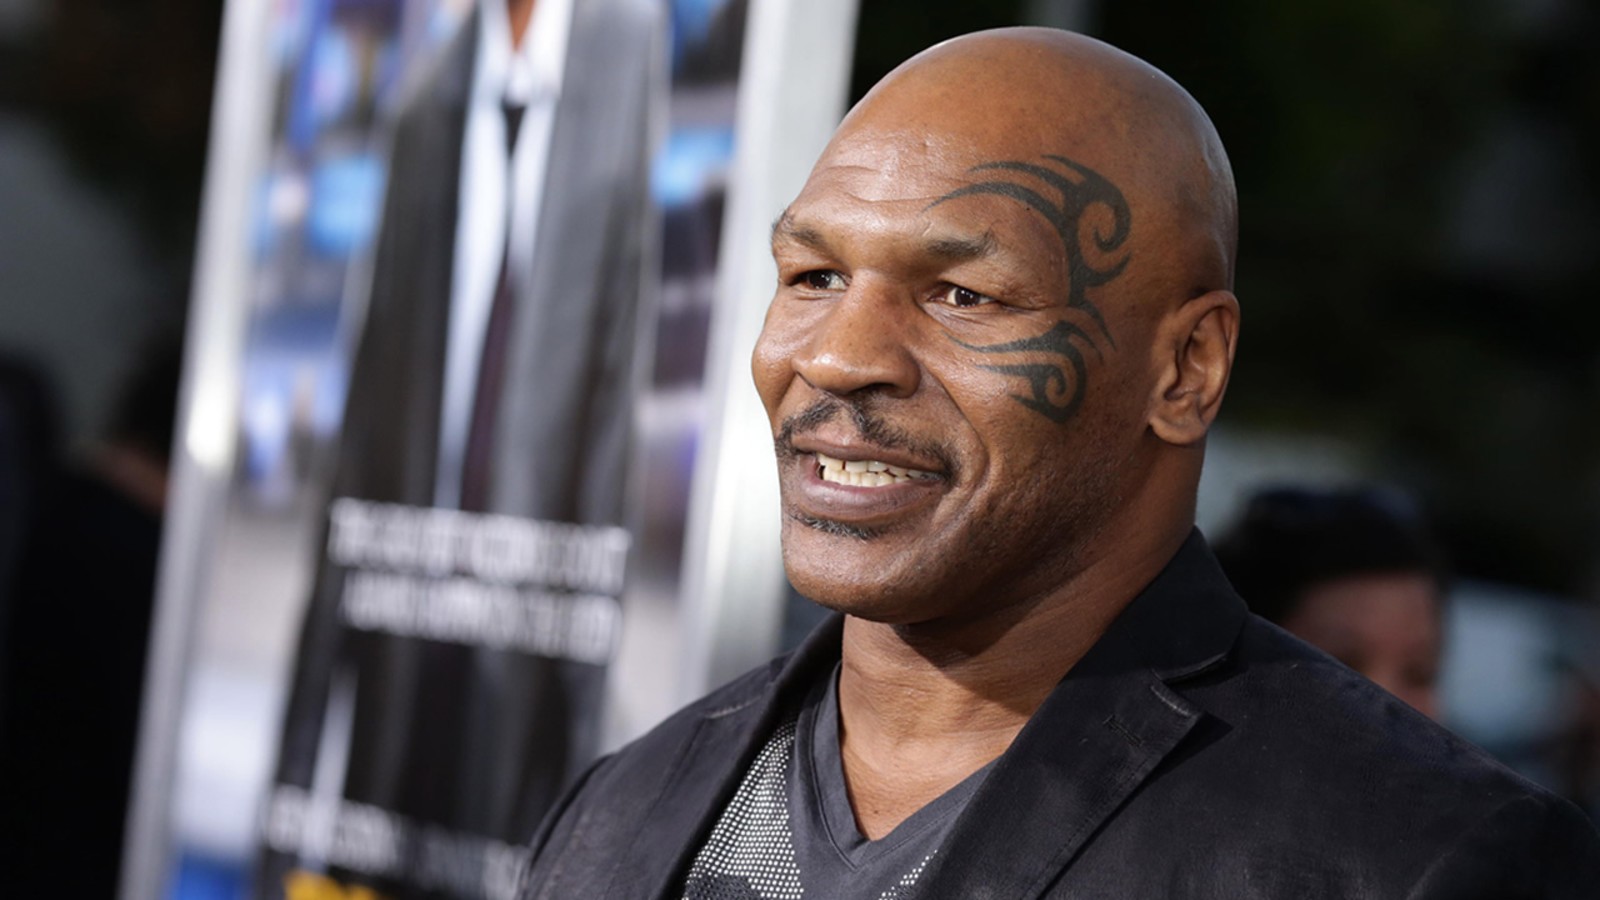 Mike Tyson suffers nausea, dizziness episode on flight from Miami to LAX, spokesperson says